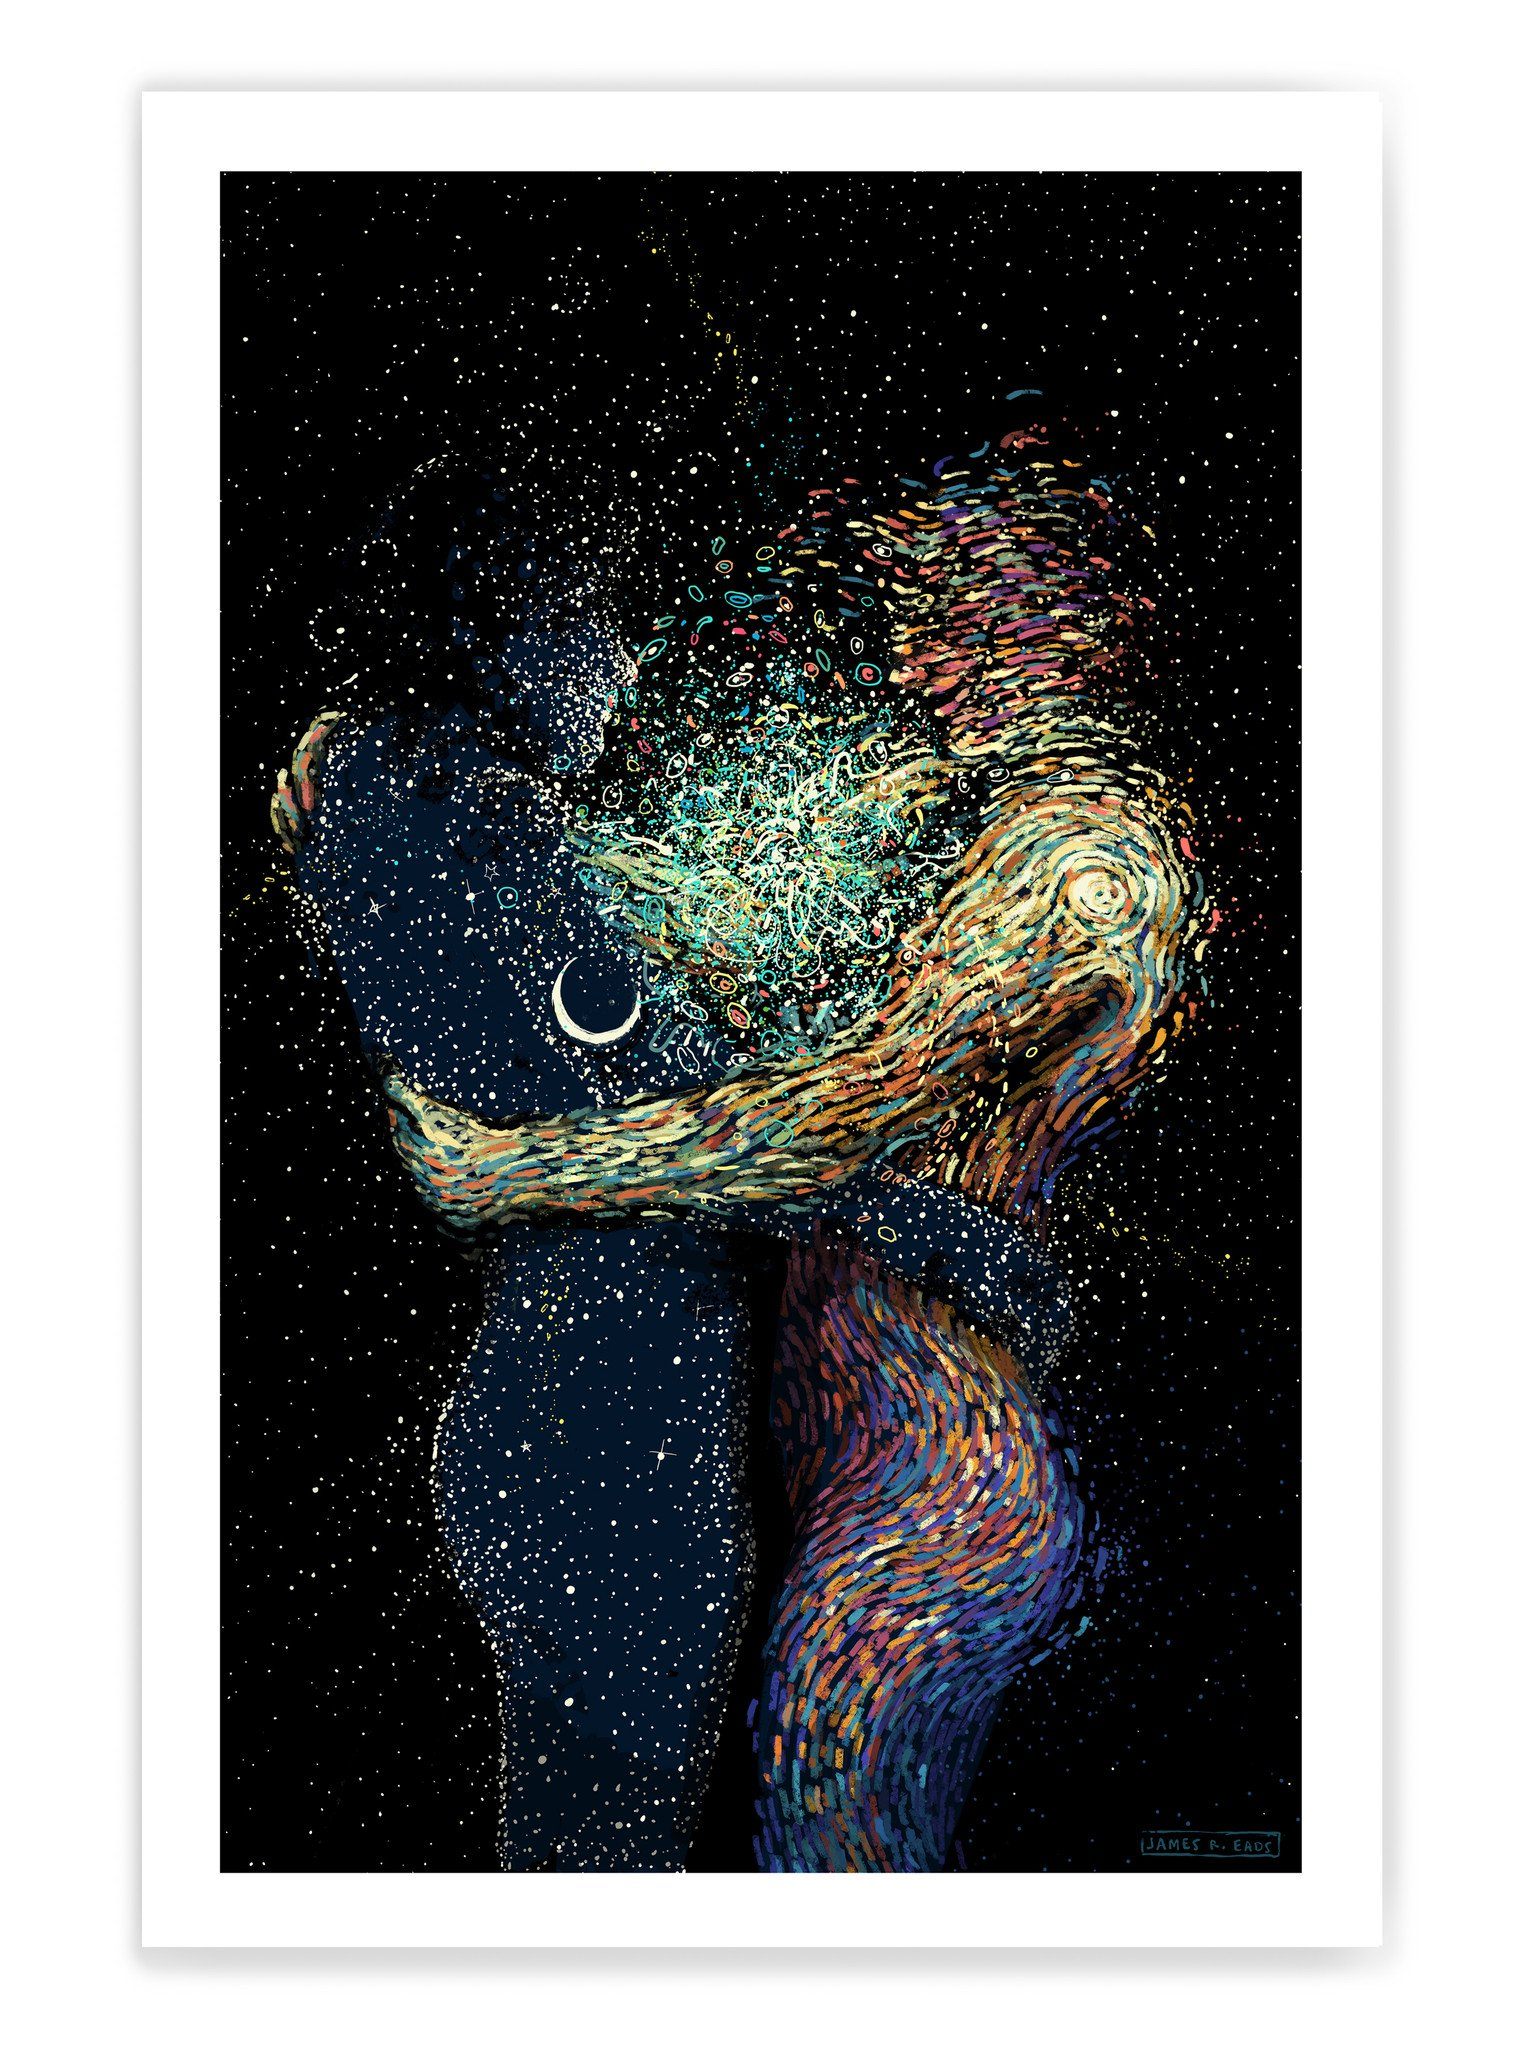 Old Friends (Edition of 100) Print James R. Eads